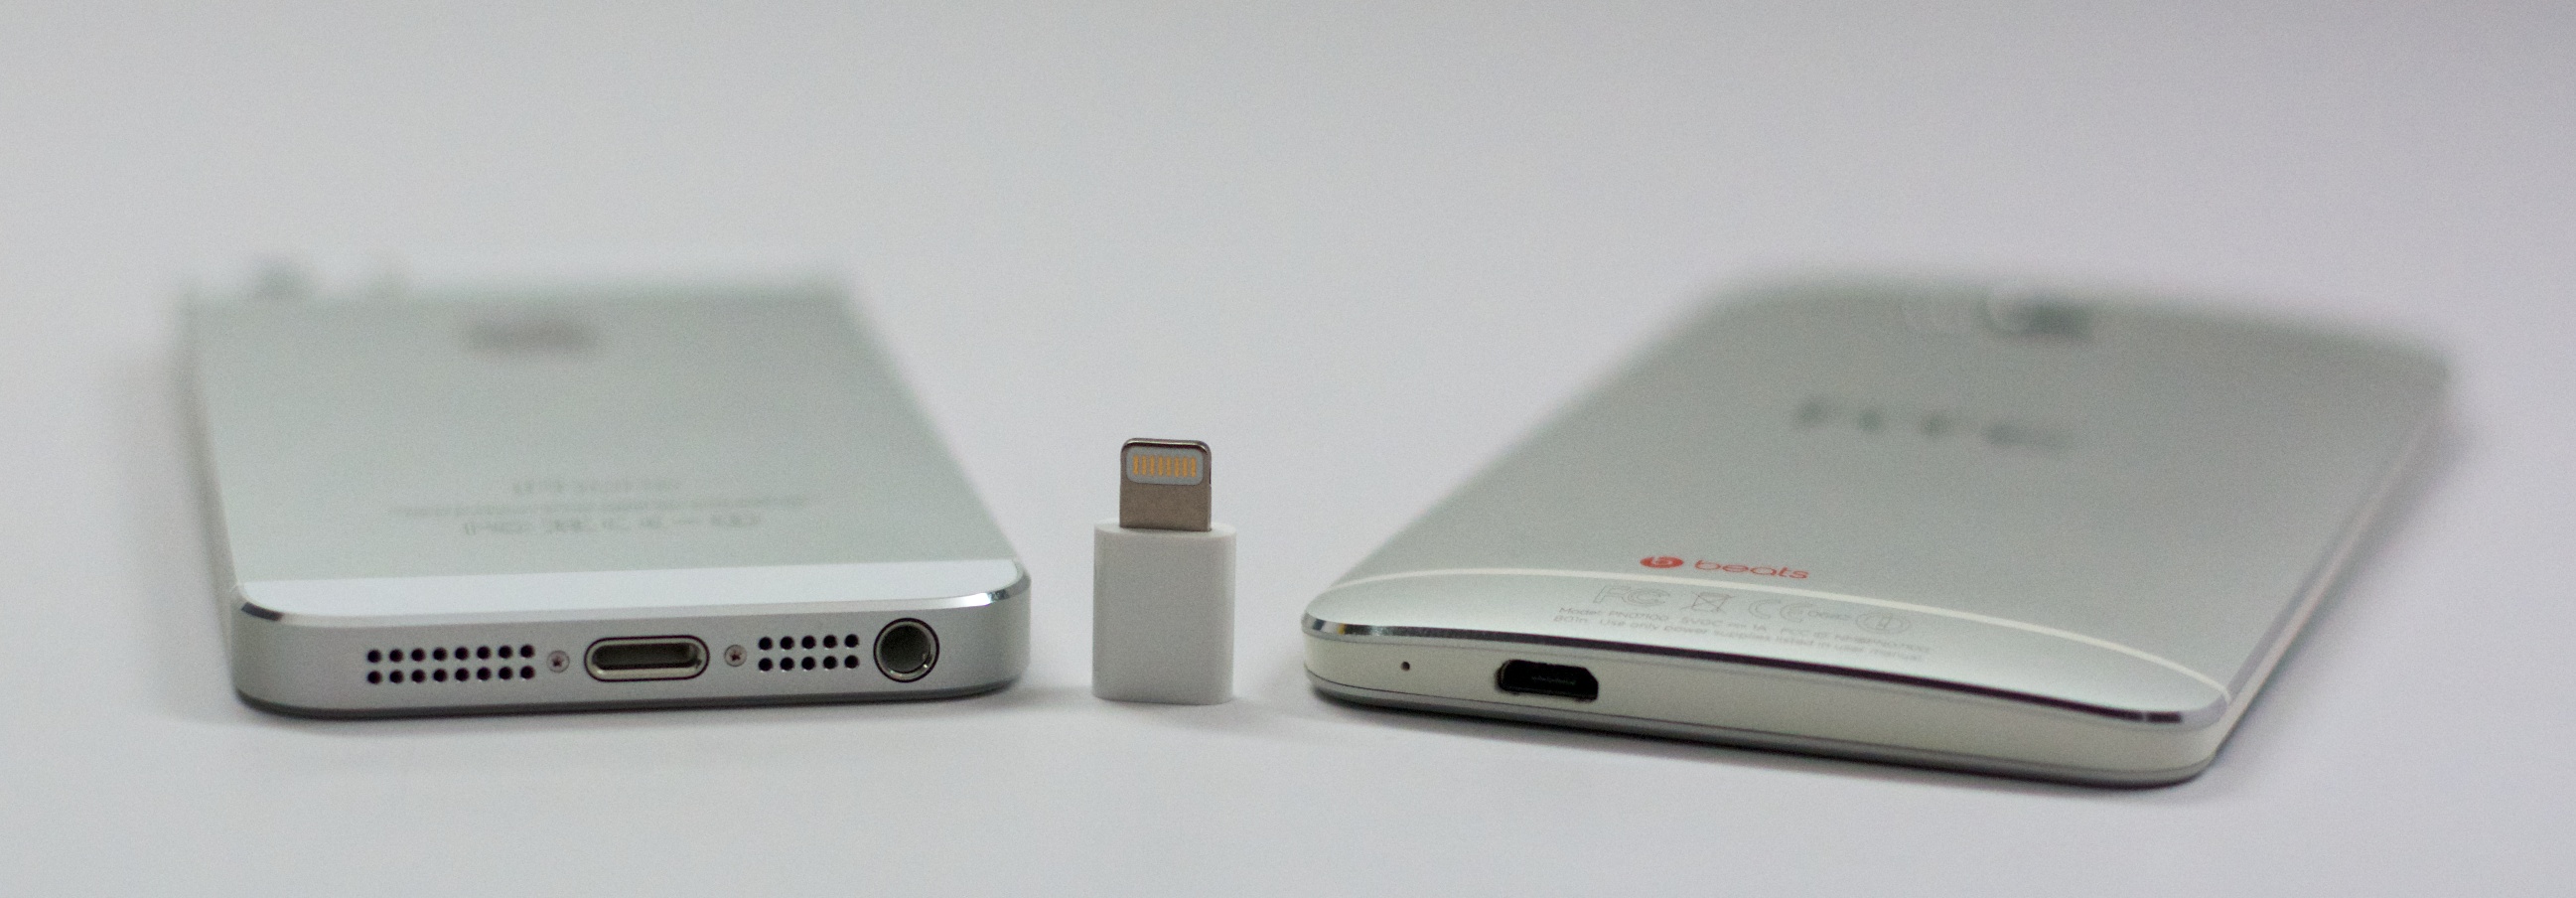 The iPhone 5s uses a Lightning connection and the HTC One uses a Micro USB, but with an adapter the same cable can charge both.